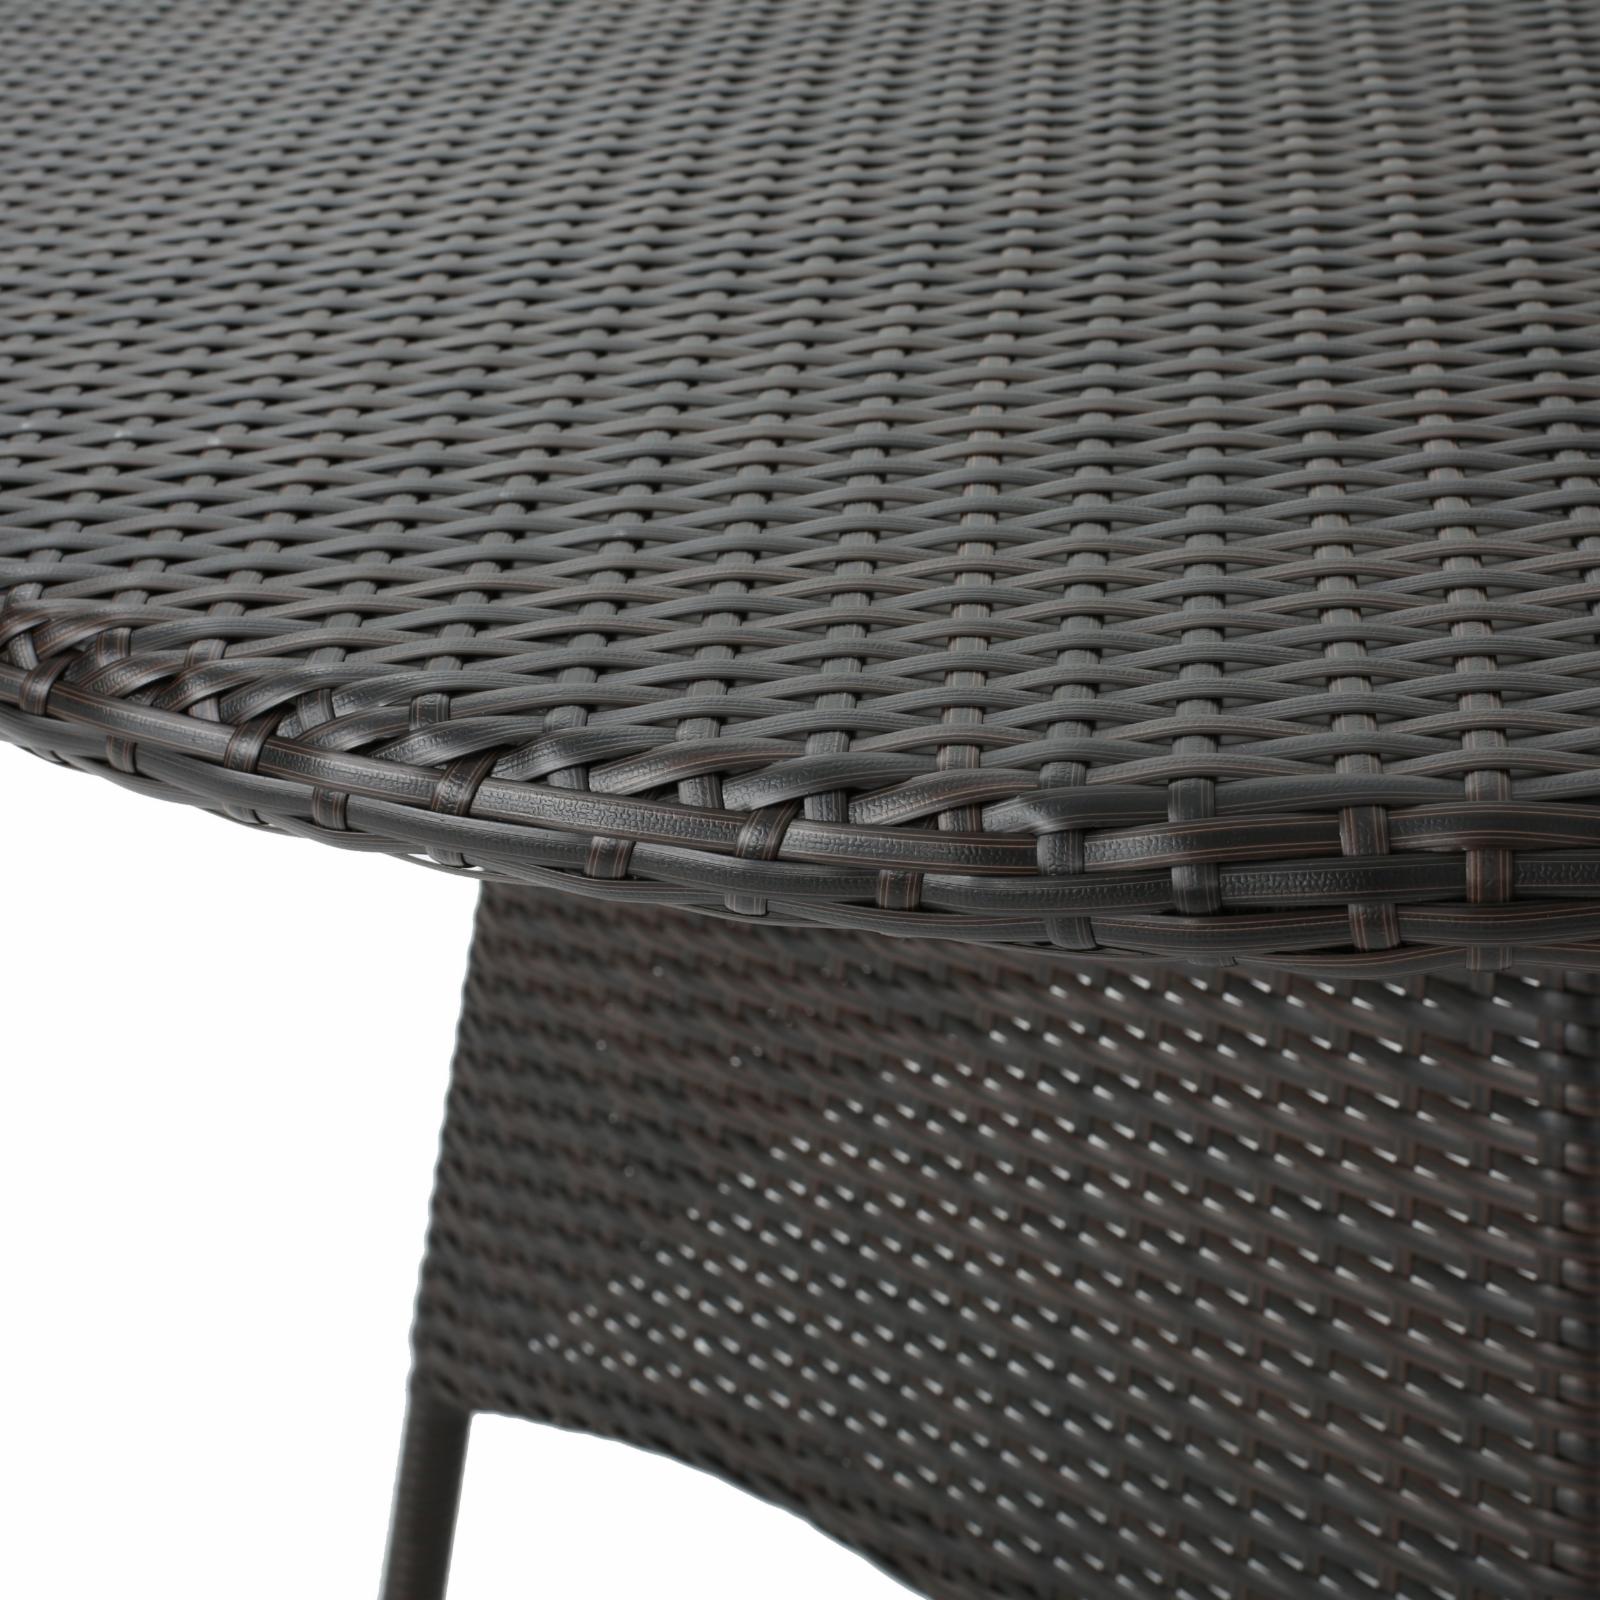 Corsica Round Patio Dining Table - image 2 of 7